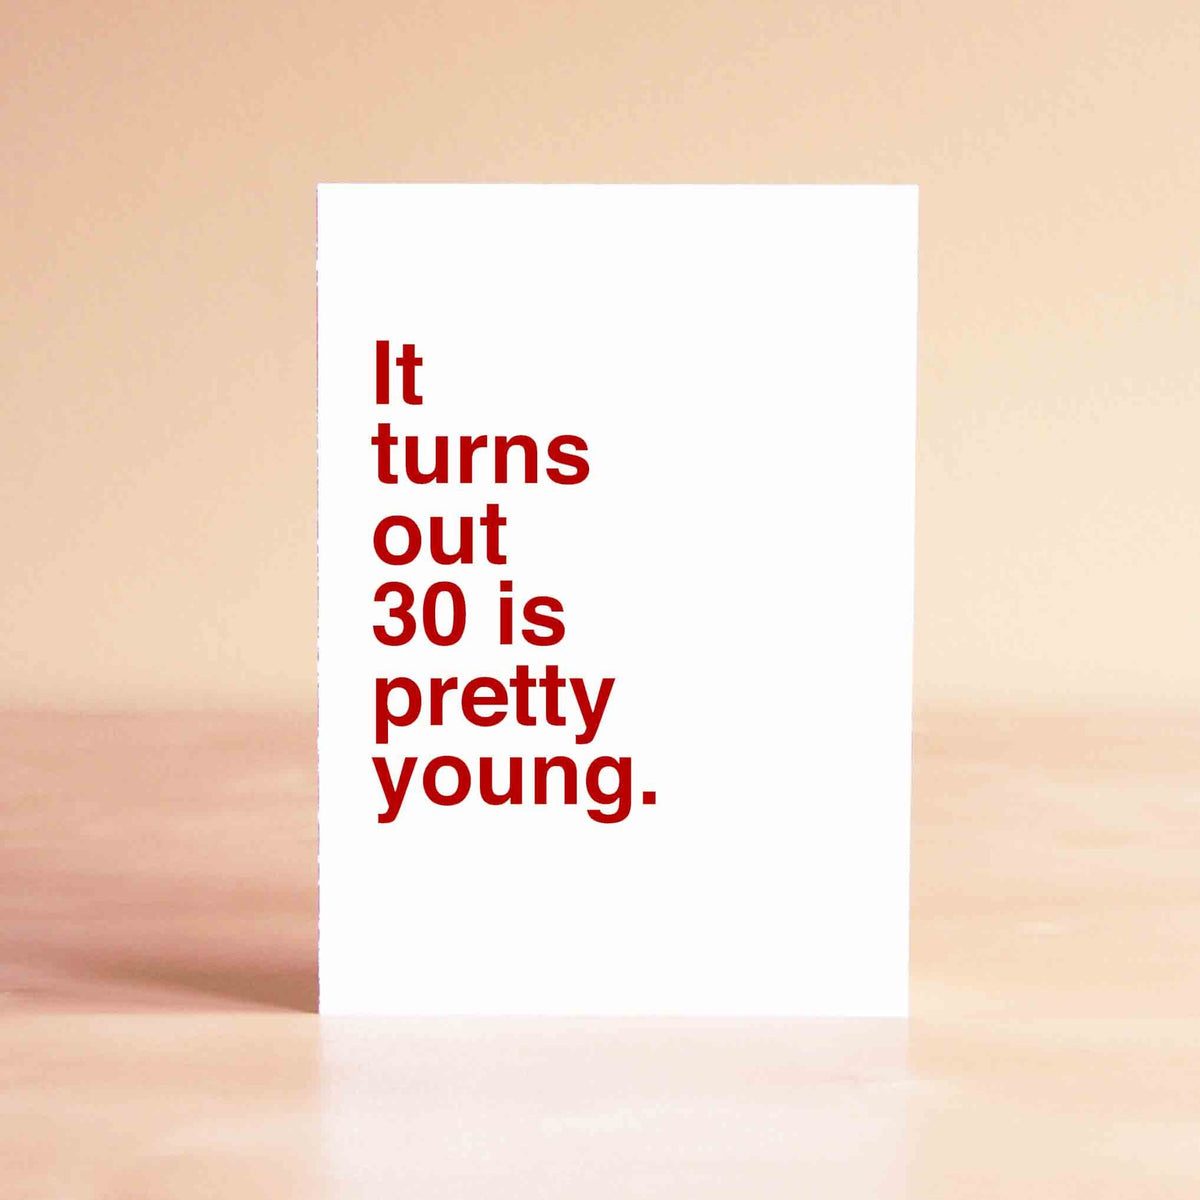 White card with red lettering reading "It turns out 30 is pretty young."